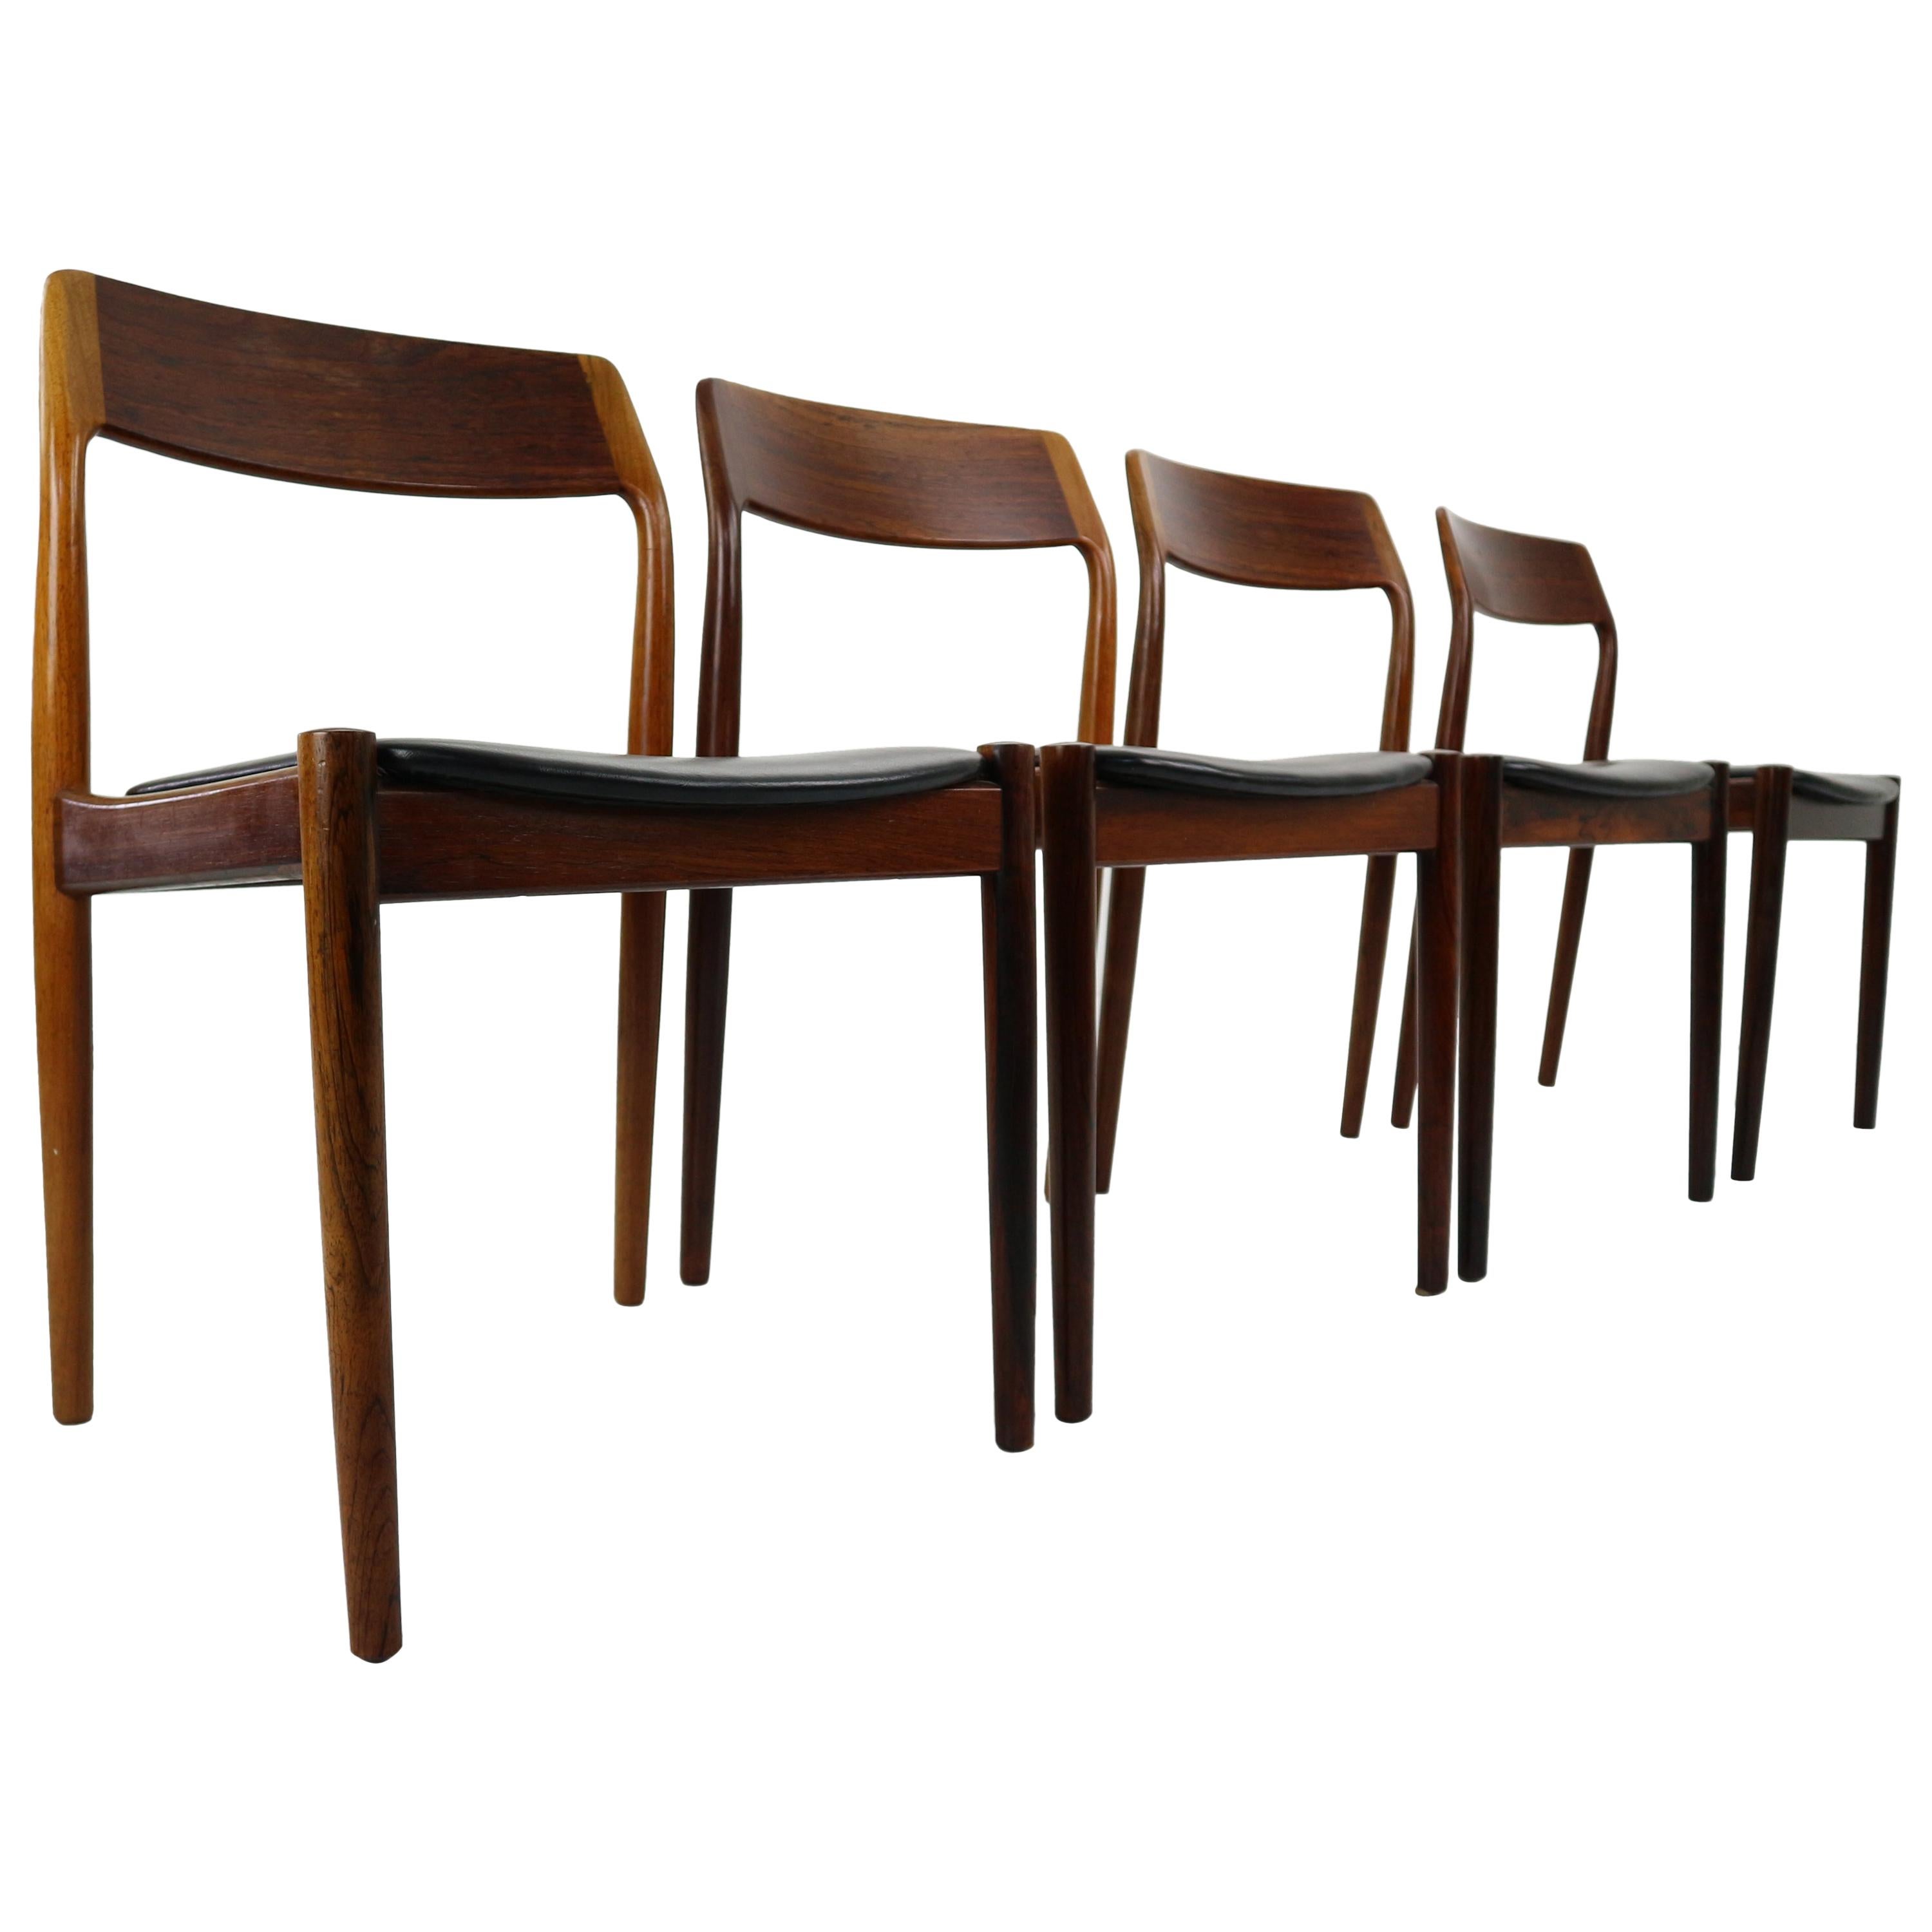 Set of 4 Danish Rosewood and Black Vinyl Chairs by Niels Otto Møller, 1960s